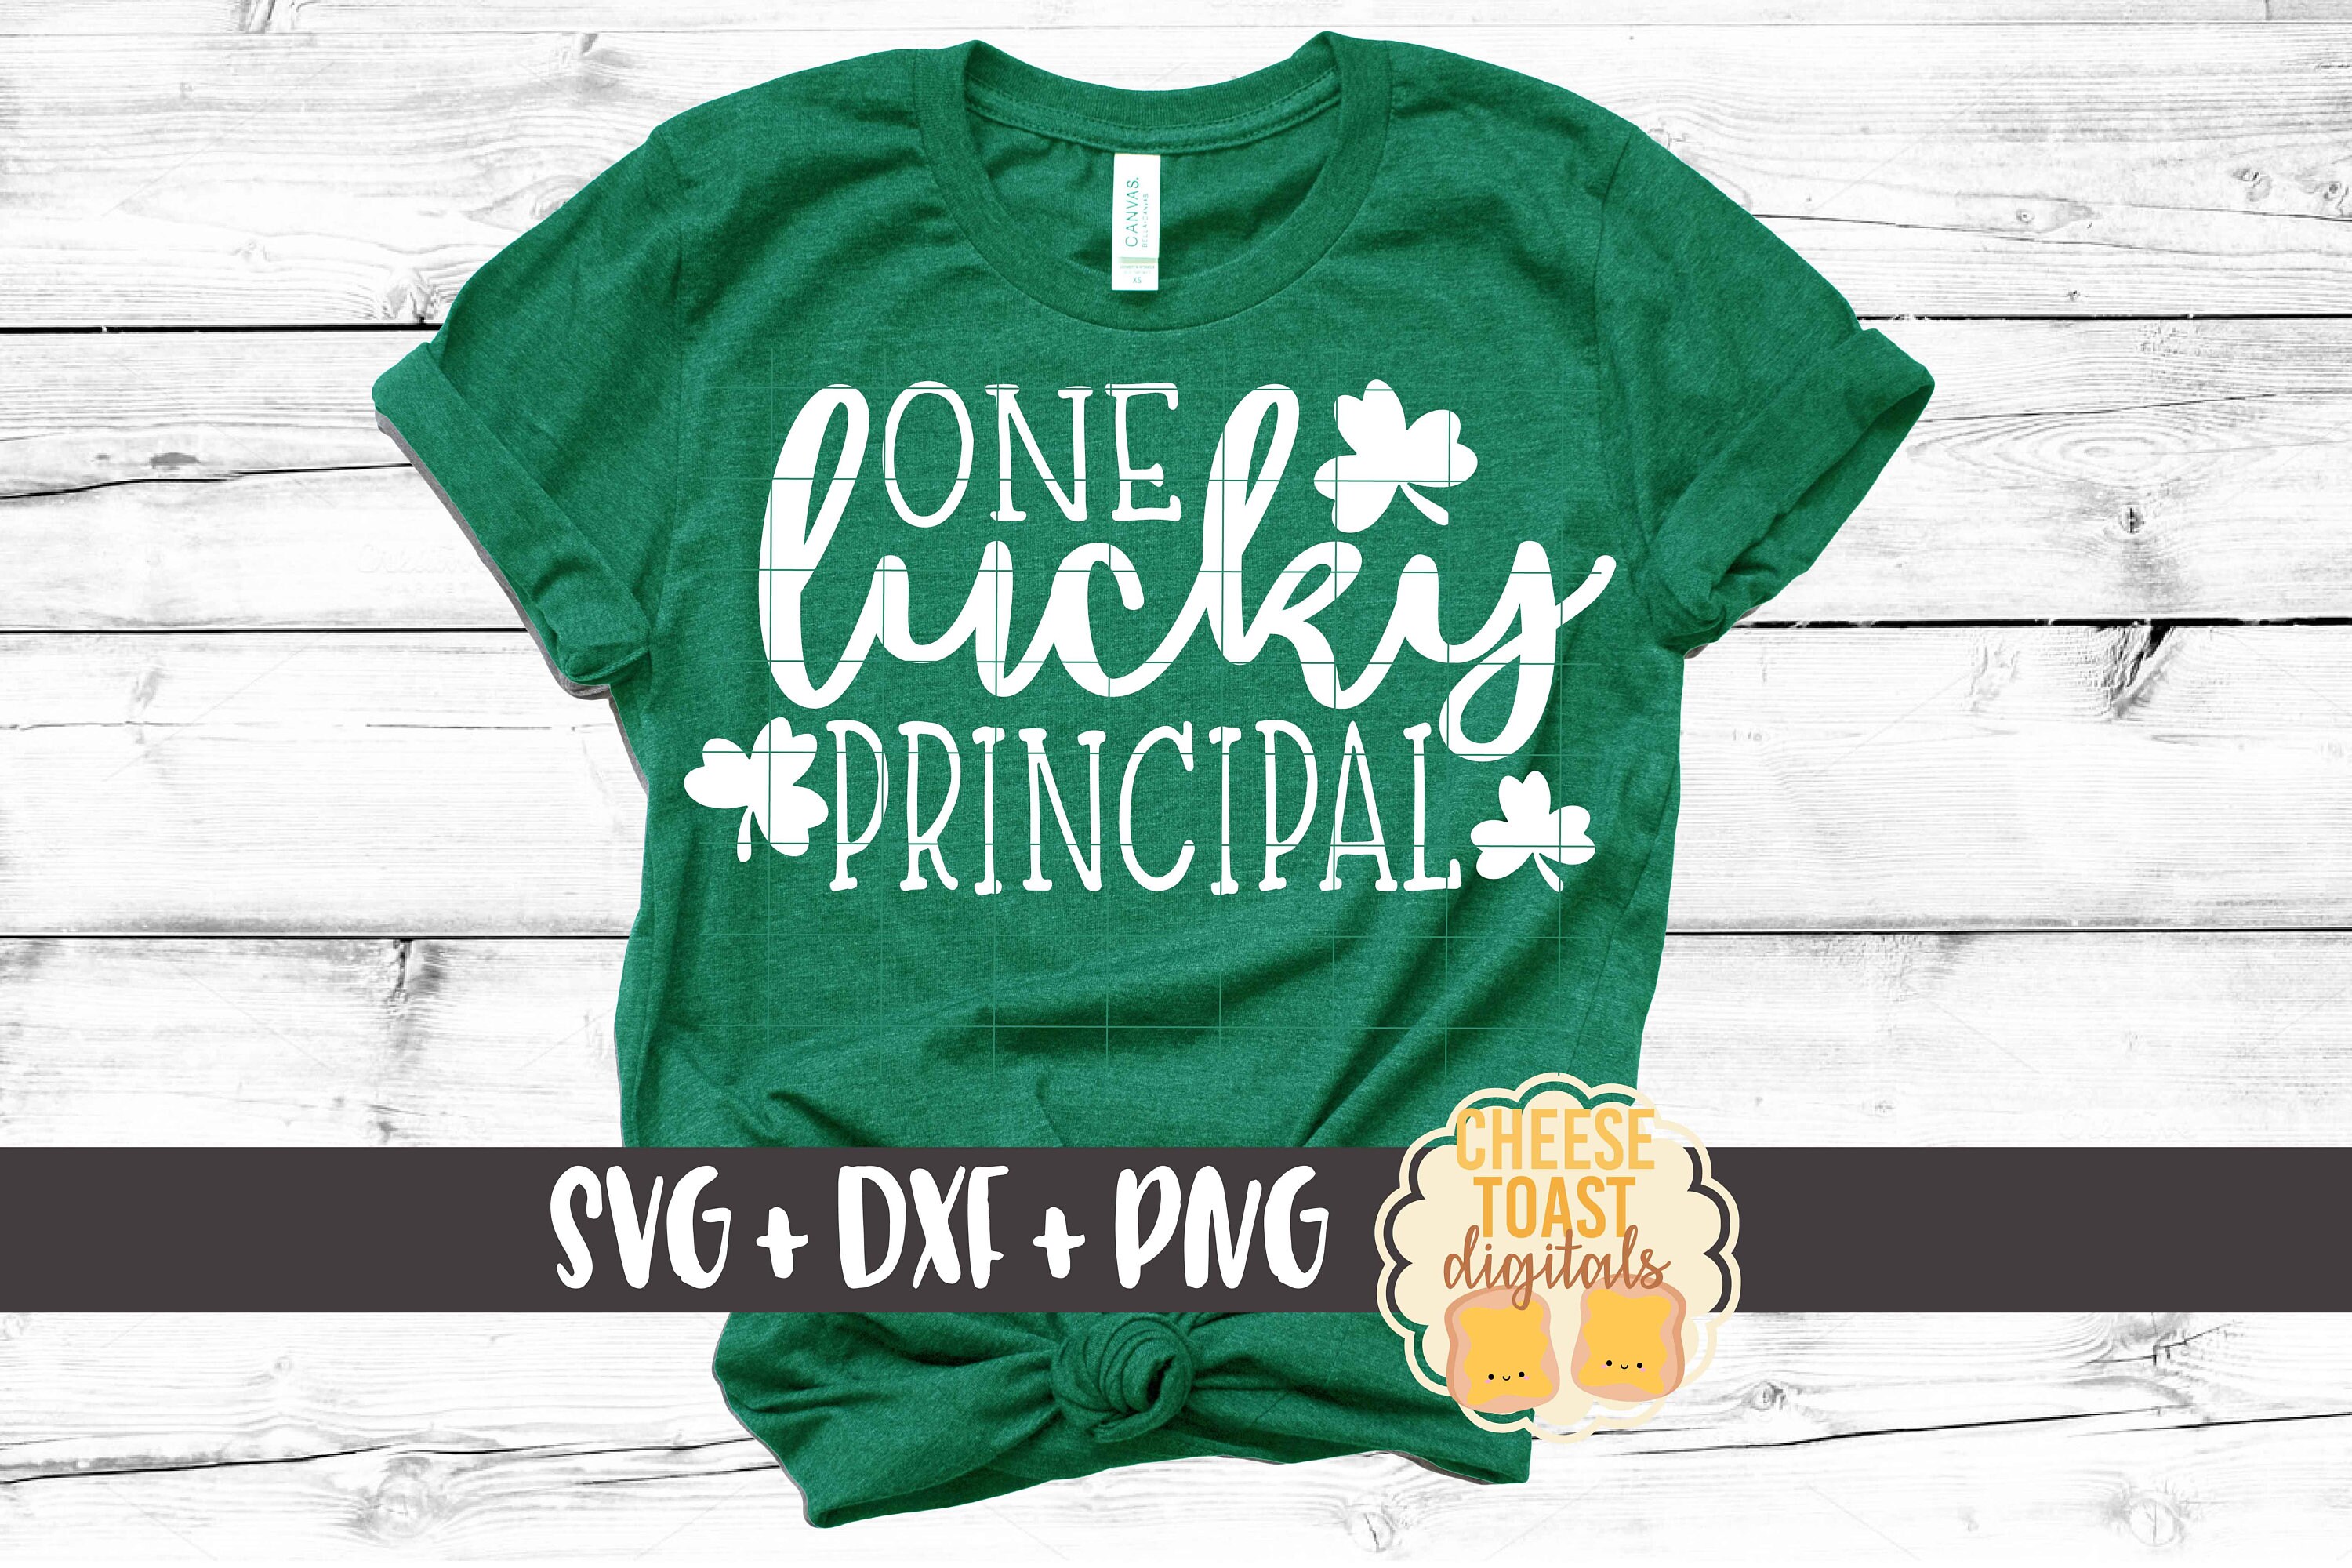 Get Lucky This St. Patrick's Day with Our Sexy T-Shirt Collection